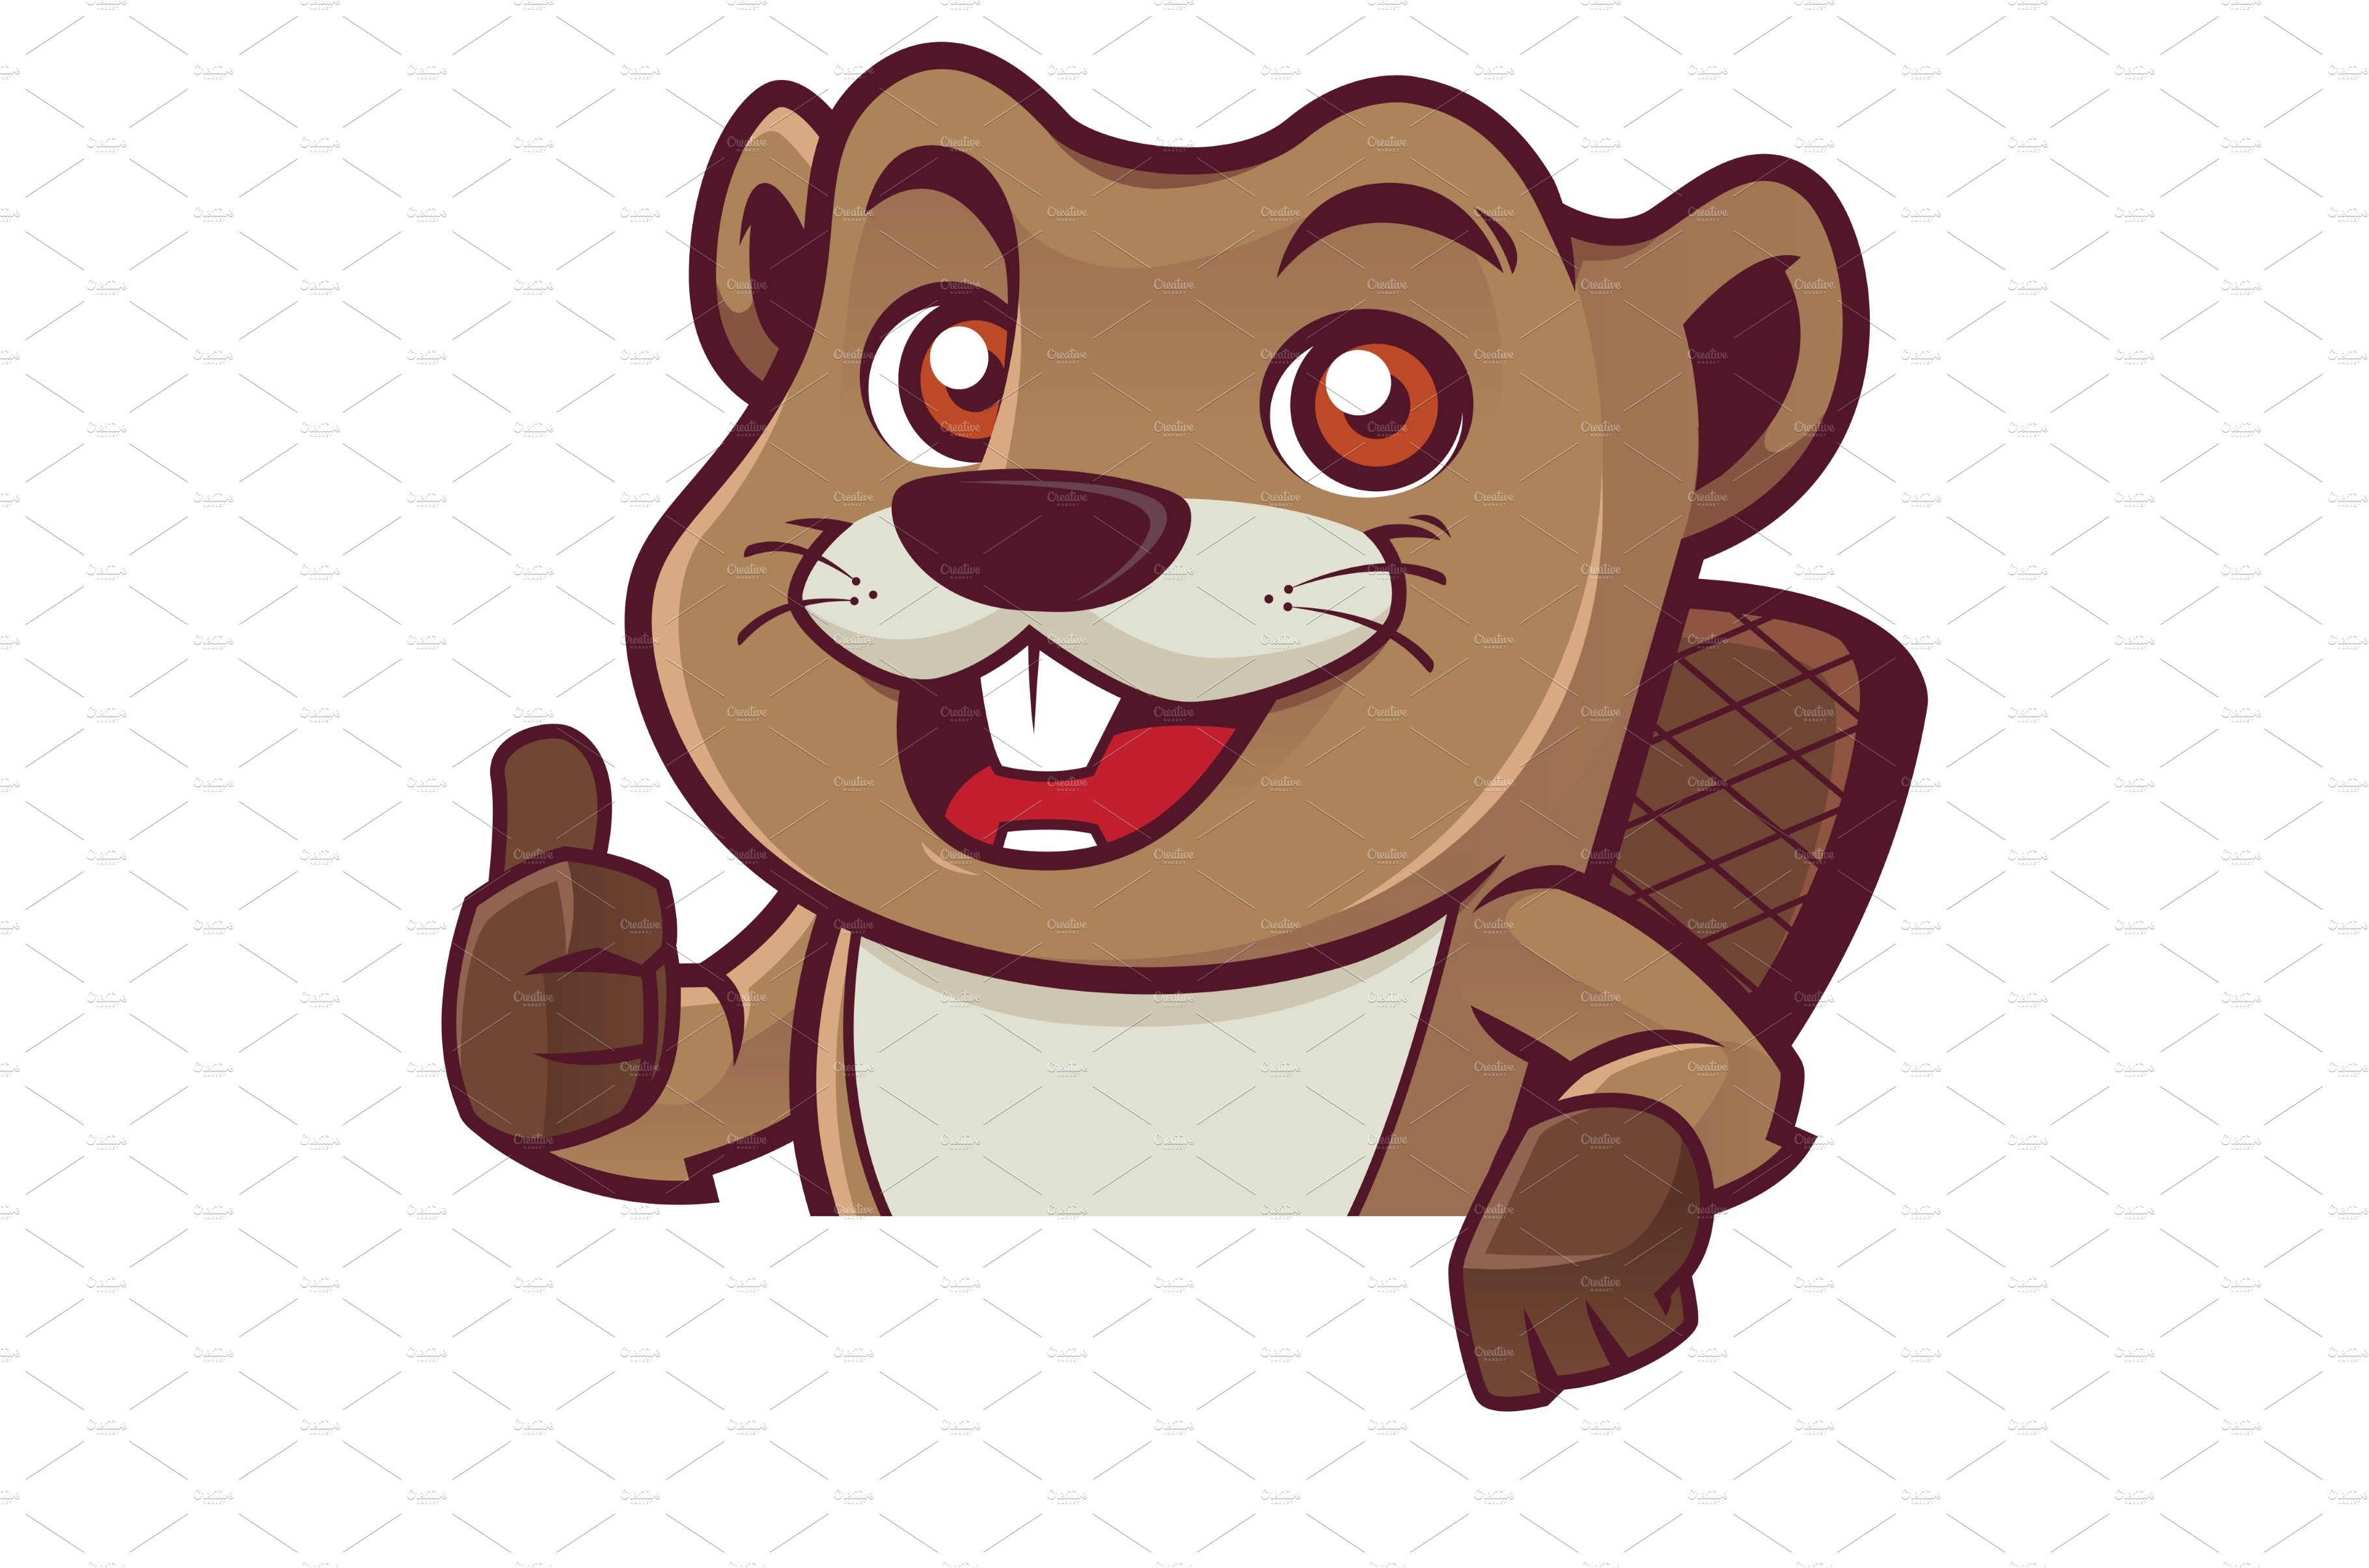 Beaver Behind Sign cover image.